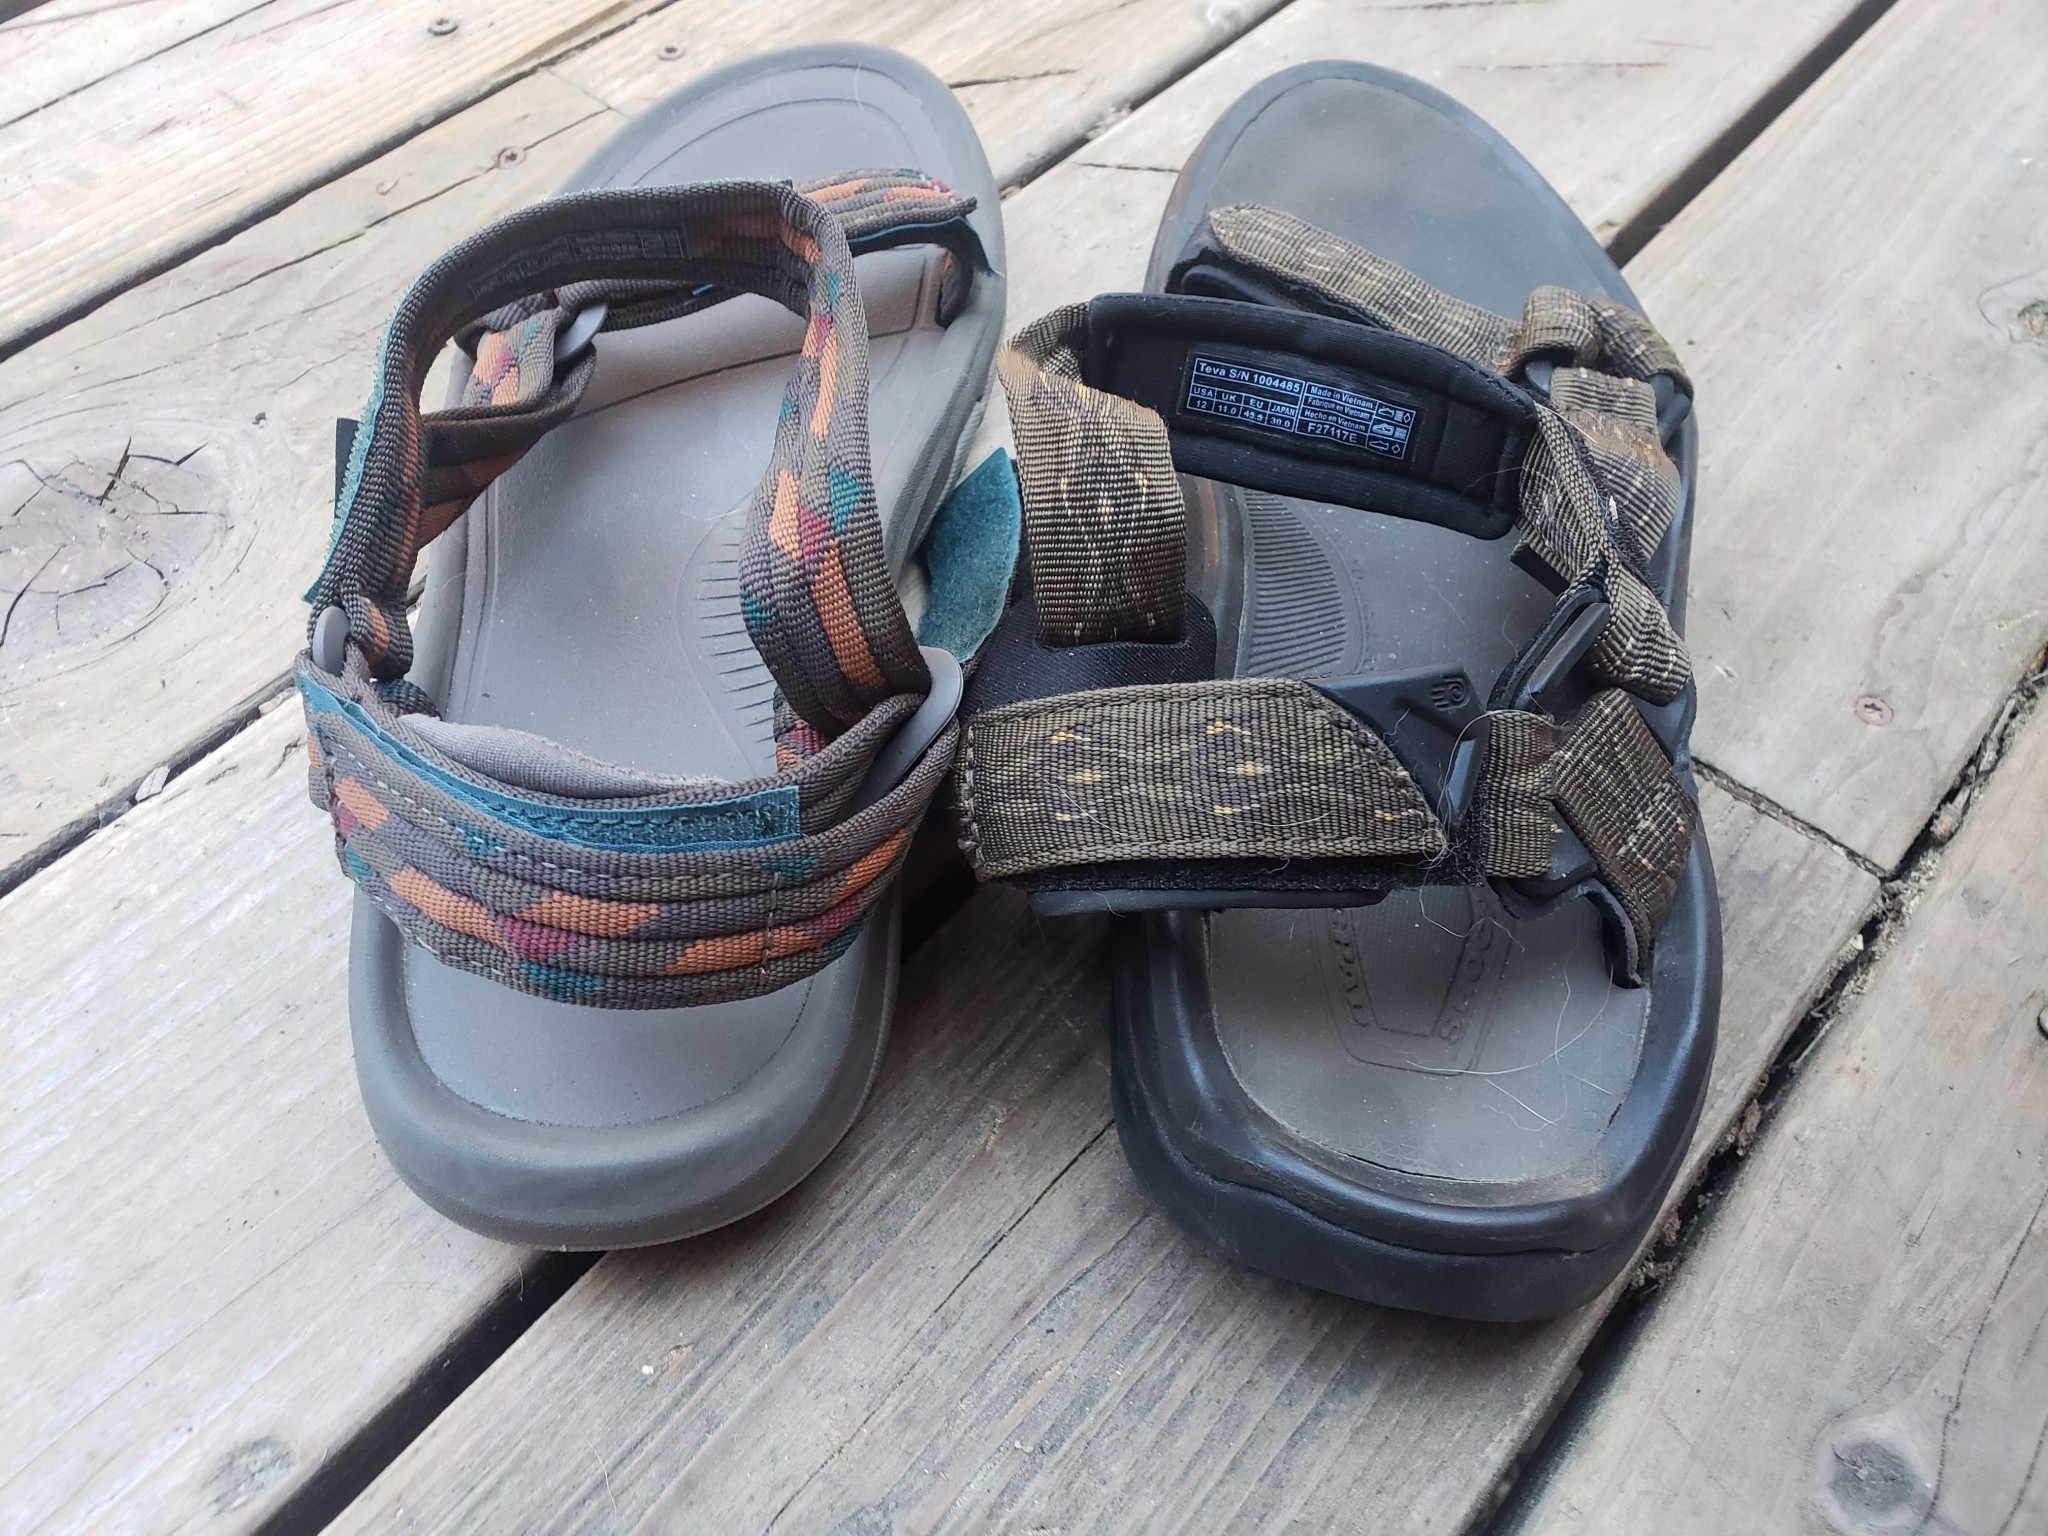 Teva Hurricane XLT 2 Review | Tested & Rated